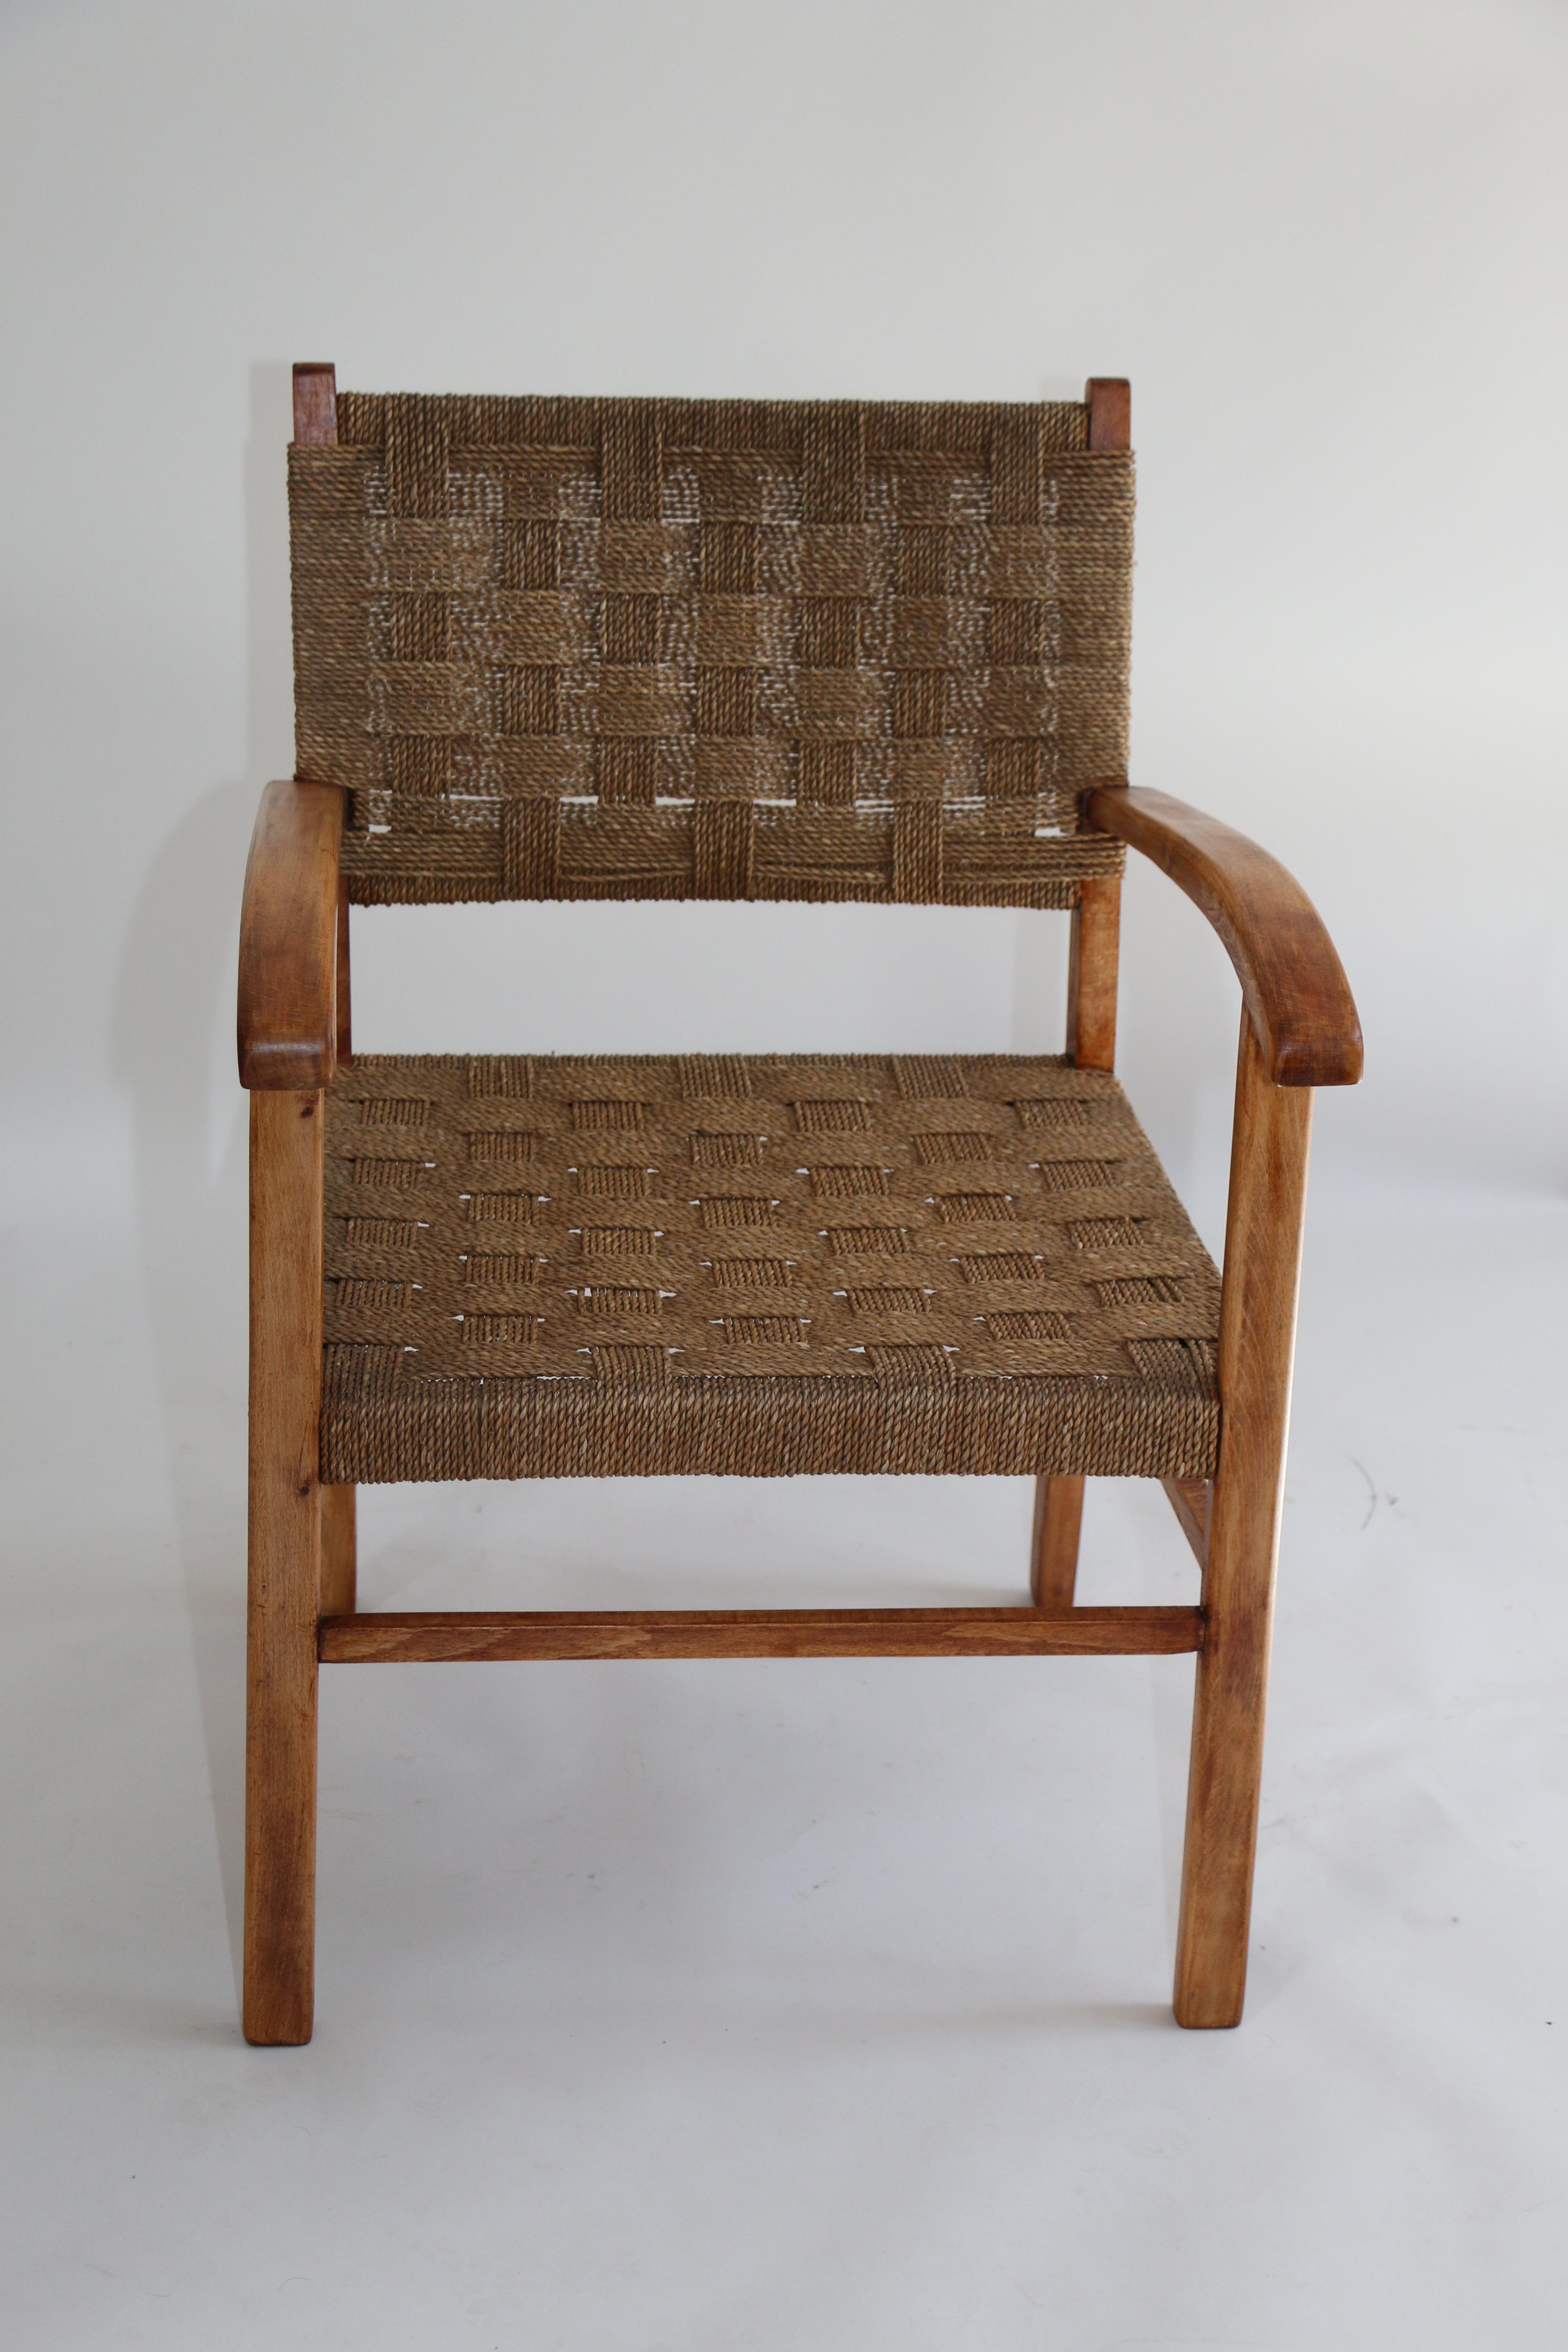 Polish Braided Chair from 20th Century For Sale